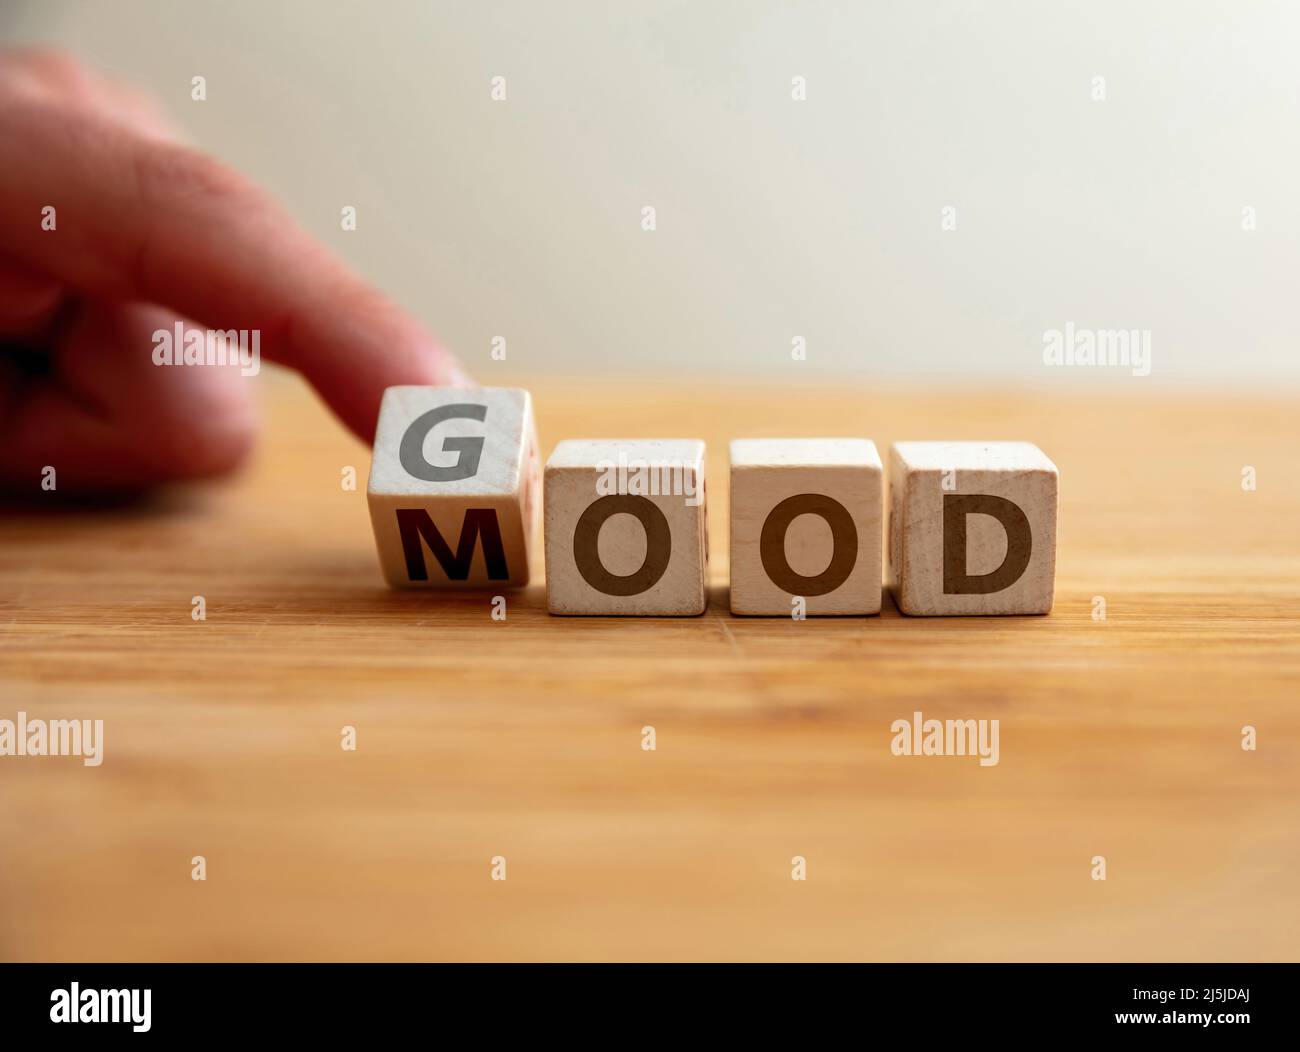 Have good mood concept. Hand flips letter on wooden cube changing the word mood to good. Message for self care, positive energy, fun, happiness. Stock Photo